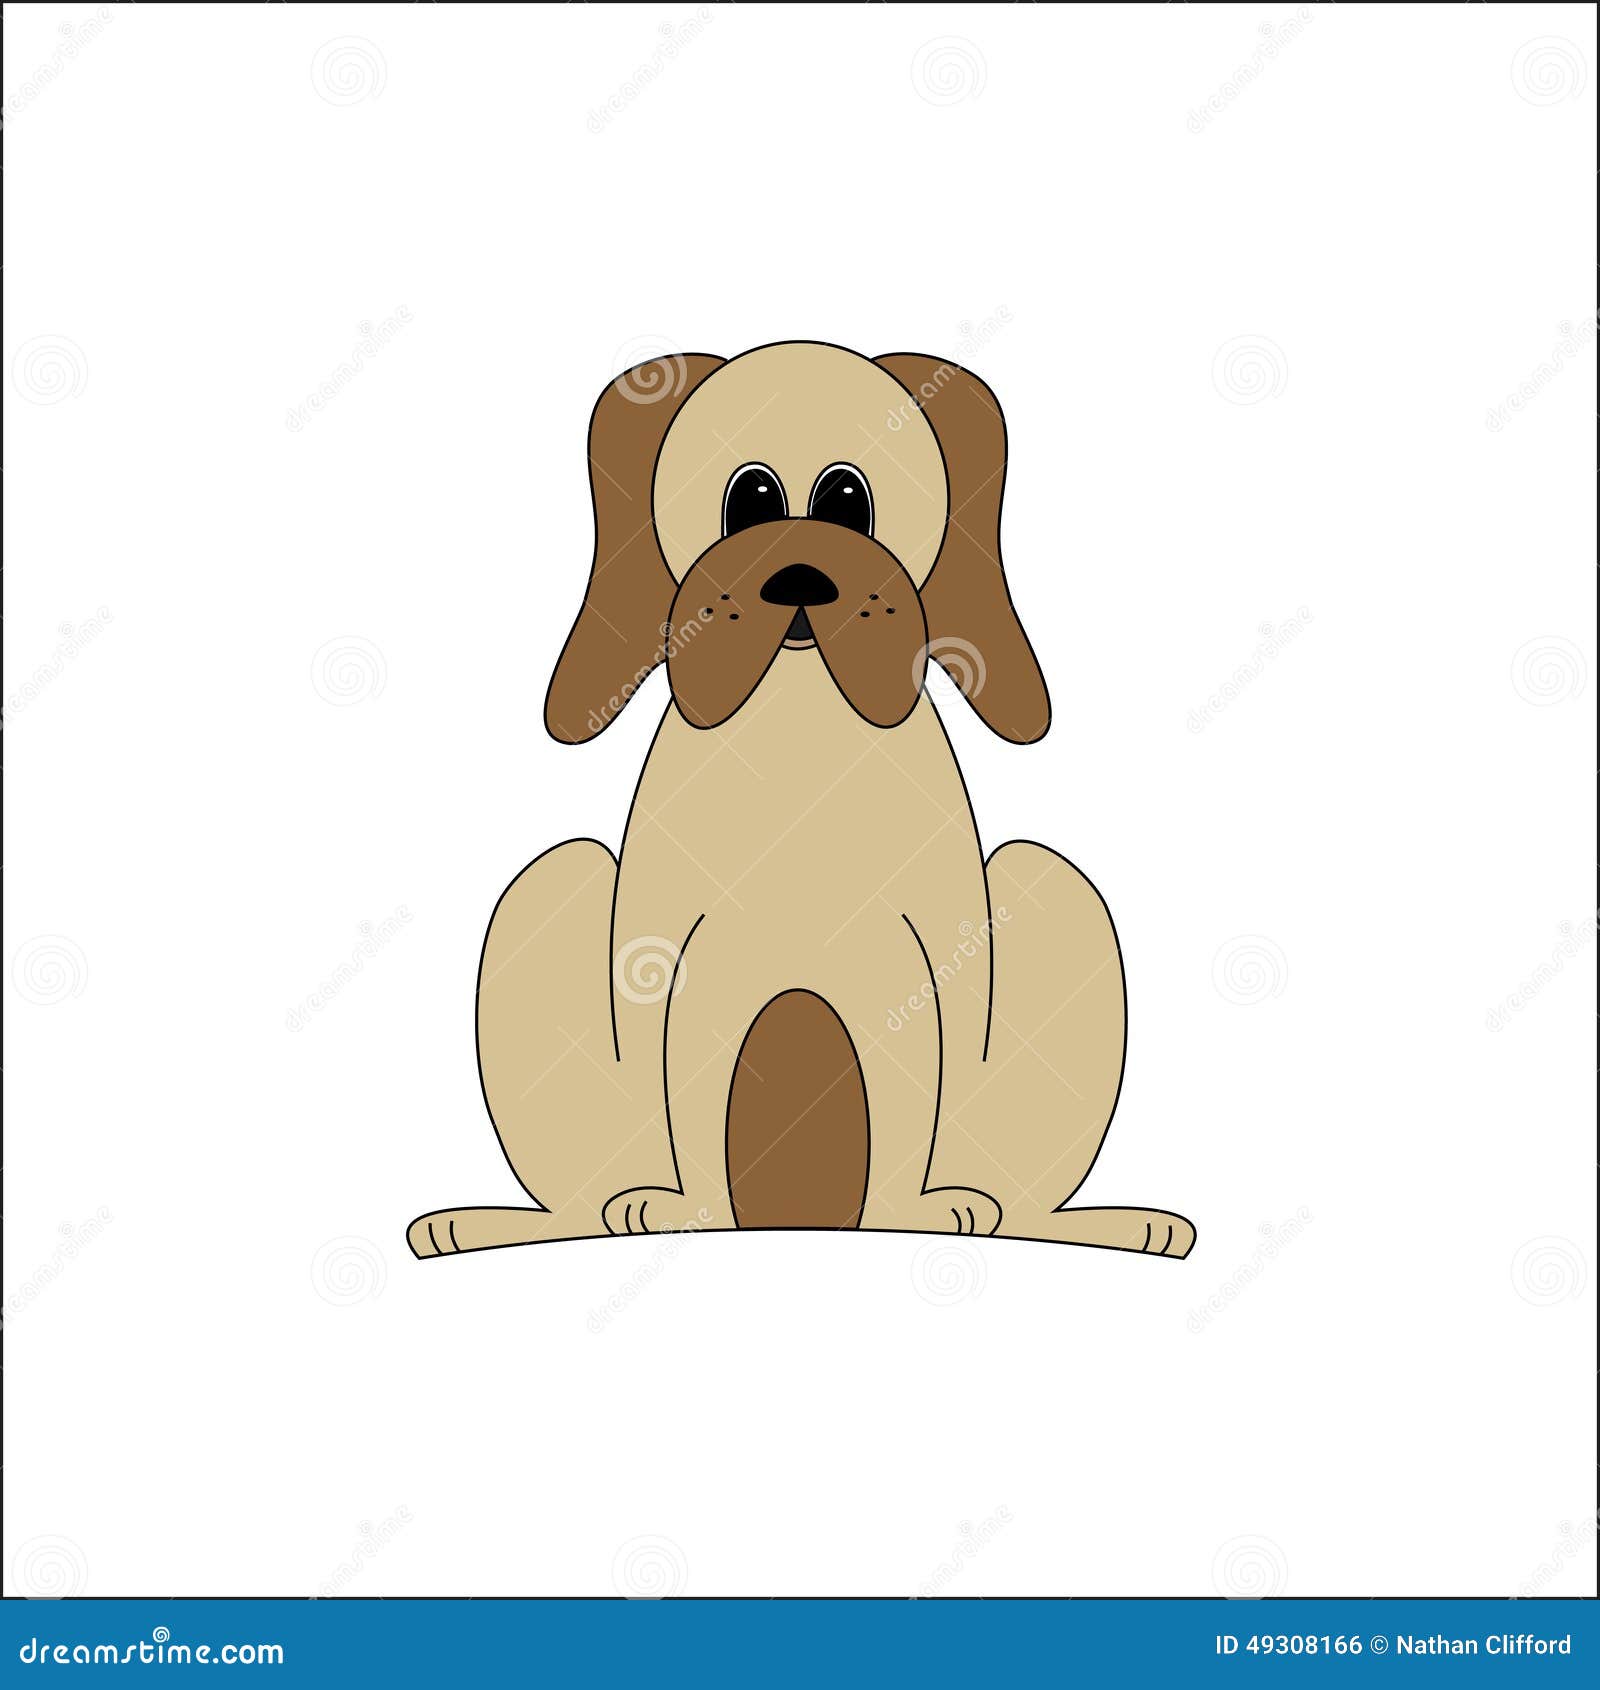 Droopy dog stock illustration. Illustration of cheerful - 49308166